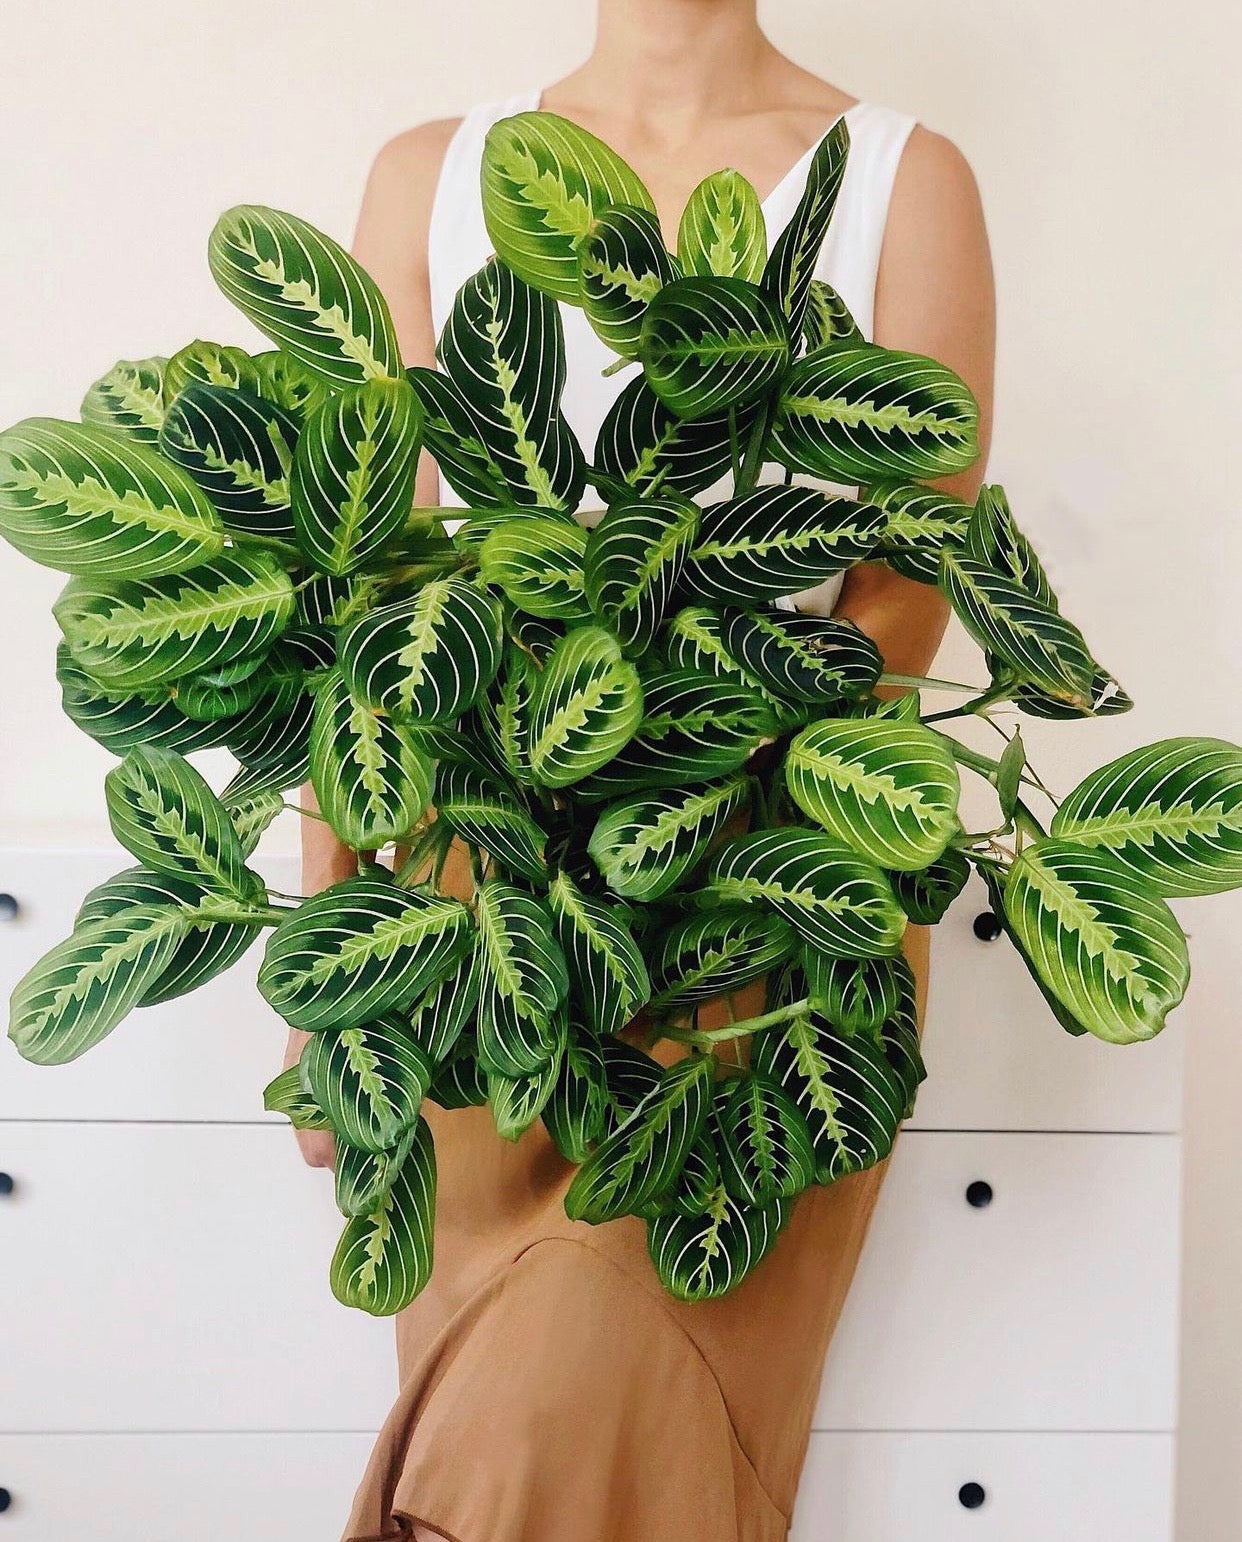 Maximize your Space with the Help of #PlantFluencer @MyPeacefulMoment on Instagram